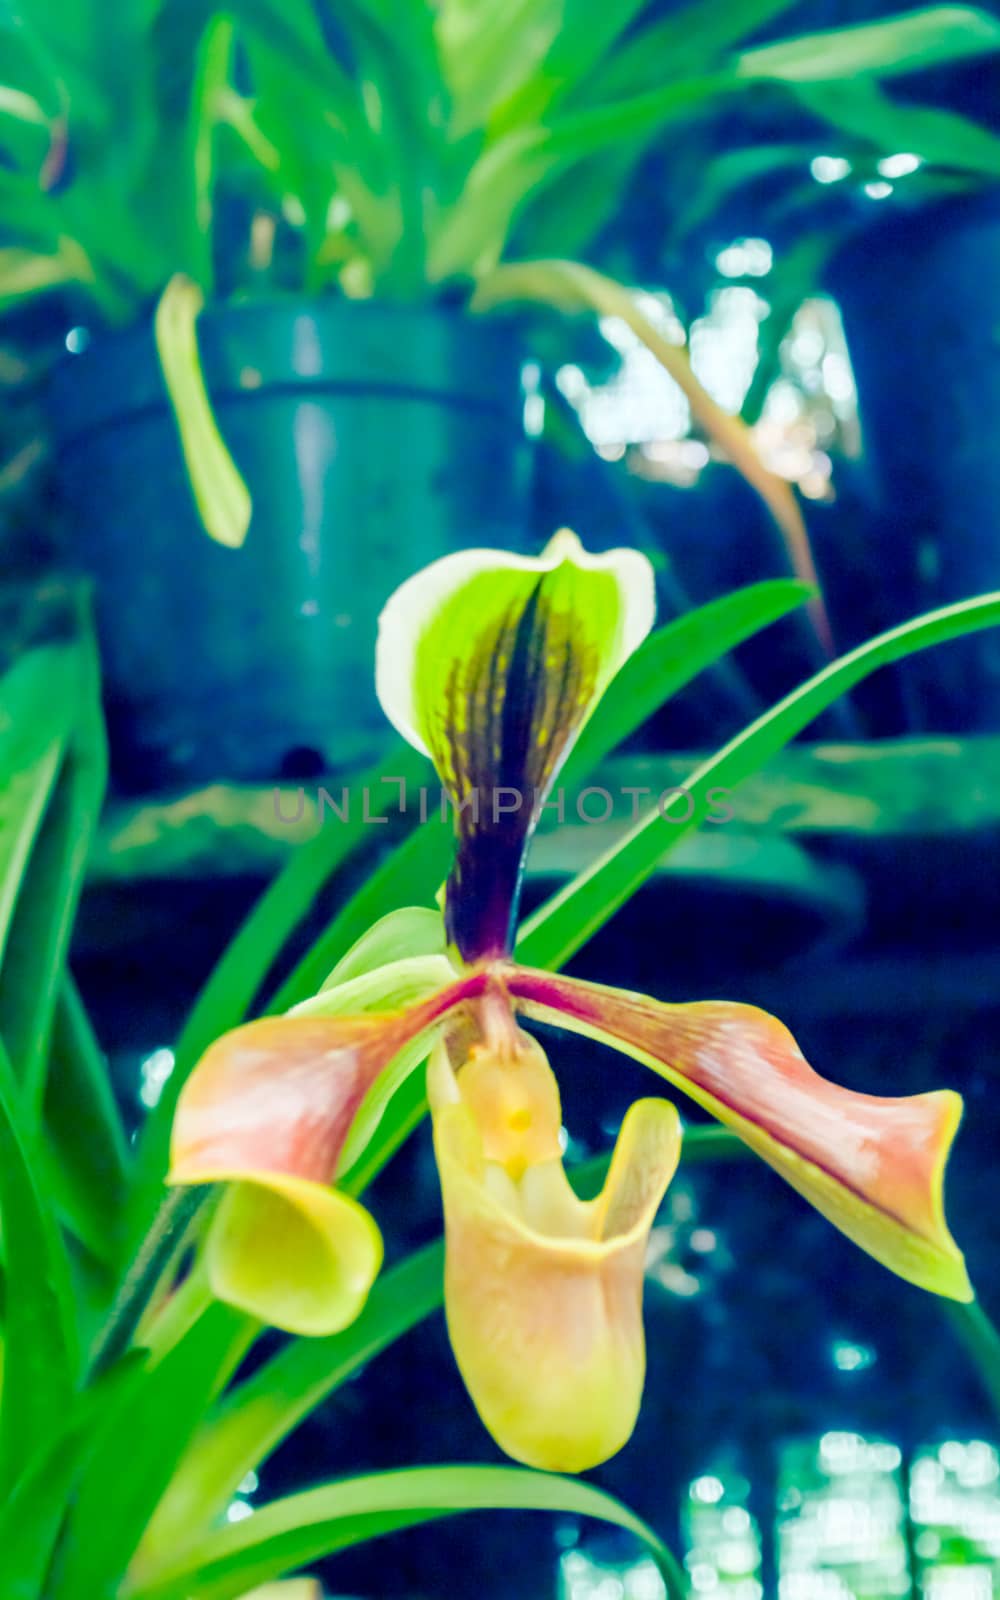 Hard-leaved Pocket Orchid (Paphiopedilum micranthum) commonly known as the Silver Slipper Orchid or Pocket Orchid. It blooms during late winter to early summer with one flower per inflorescence.